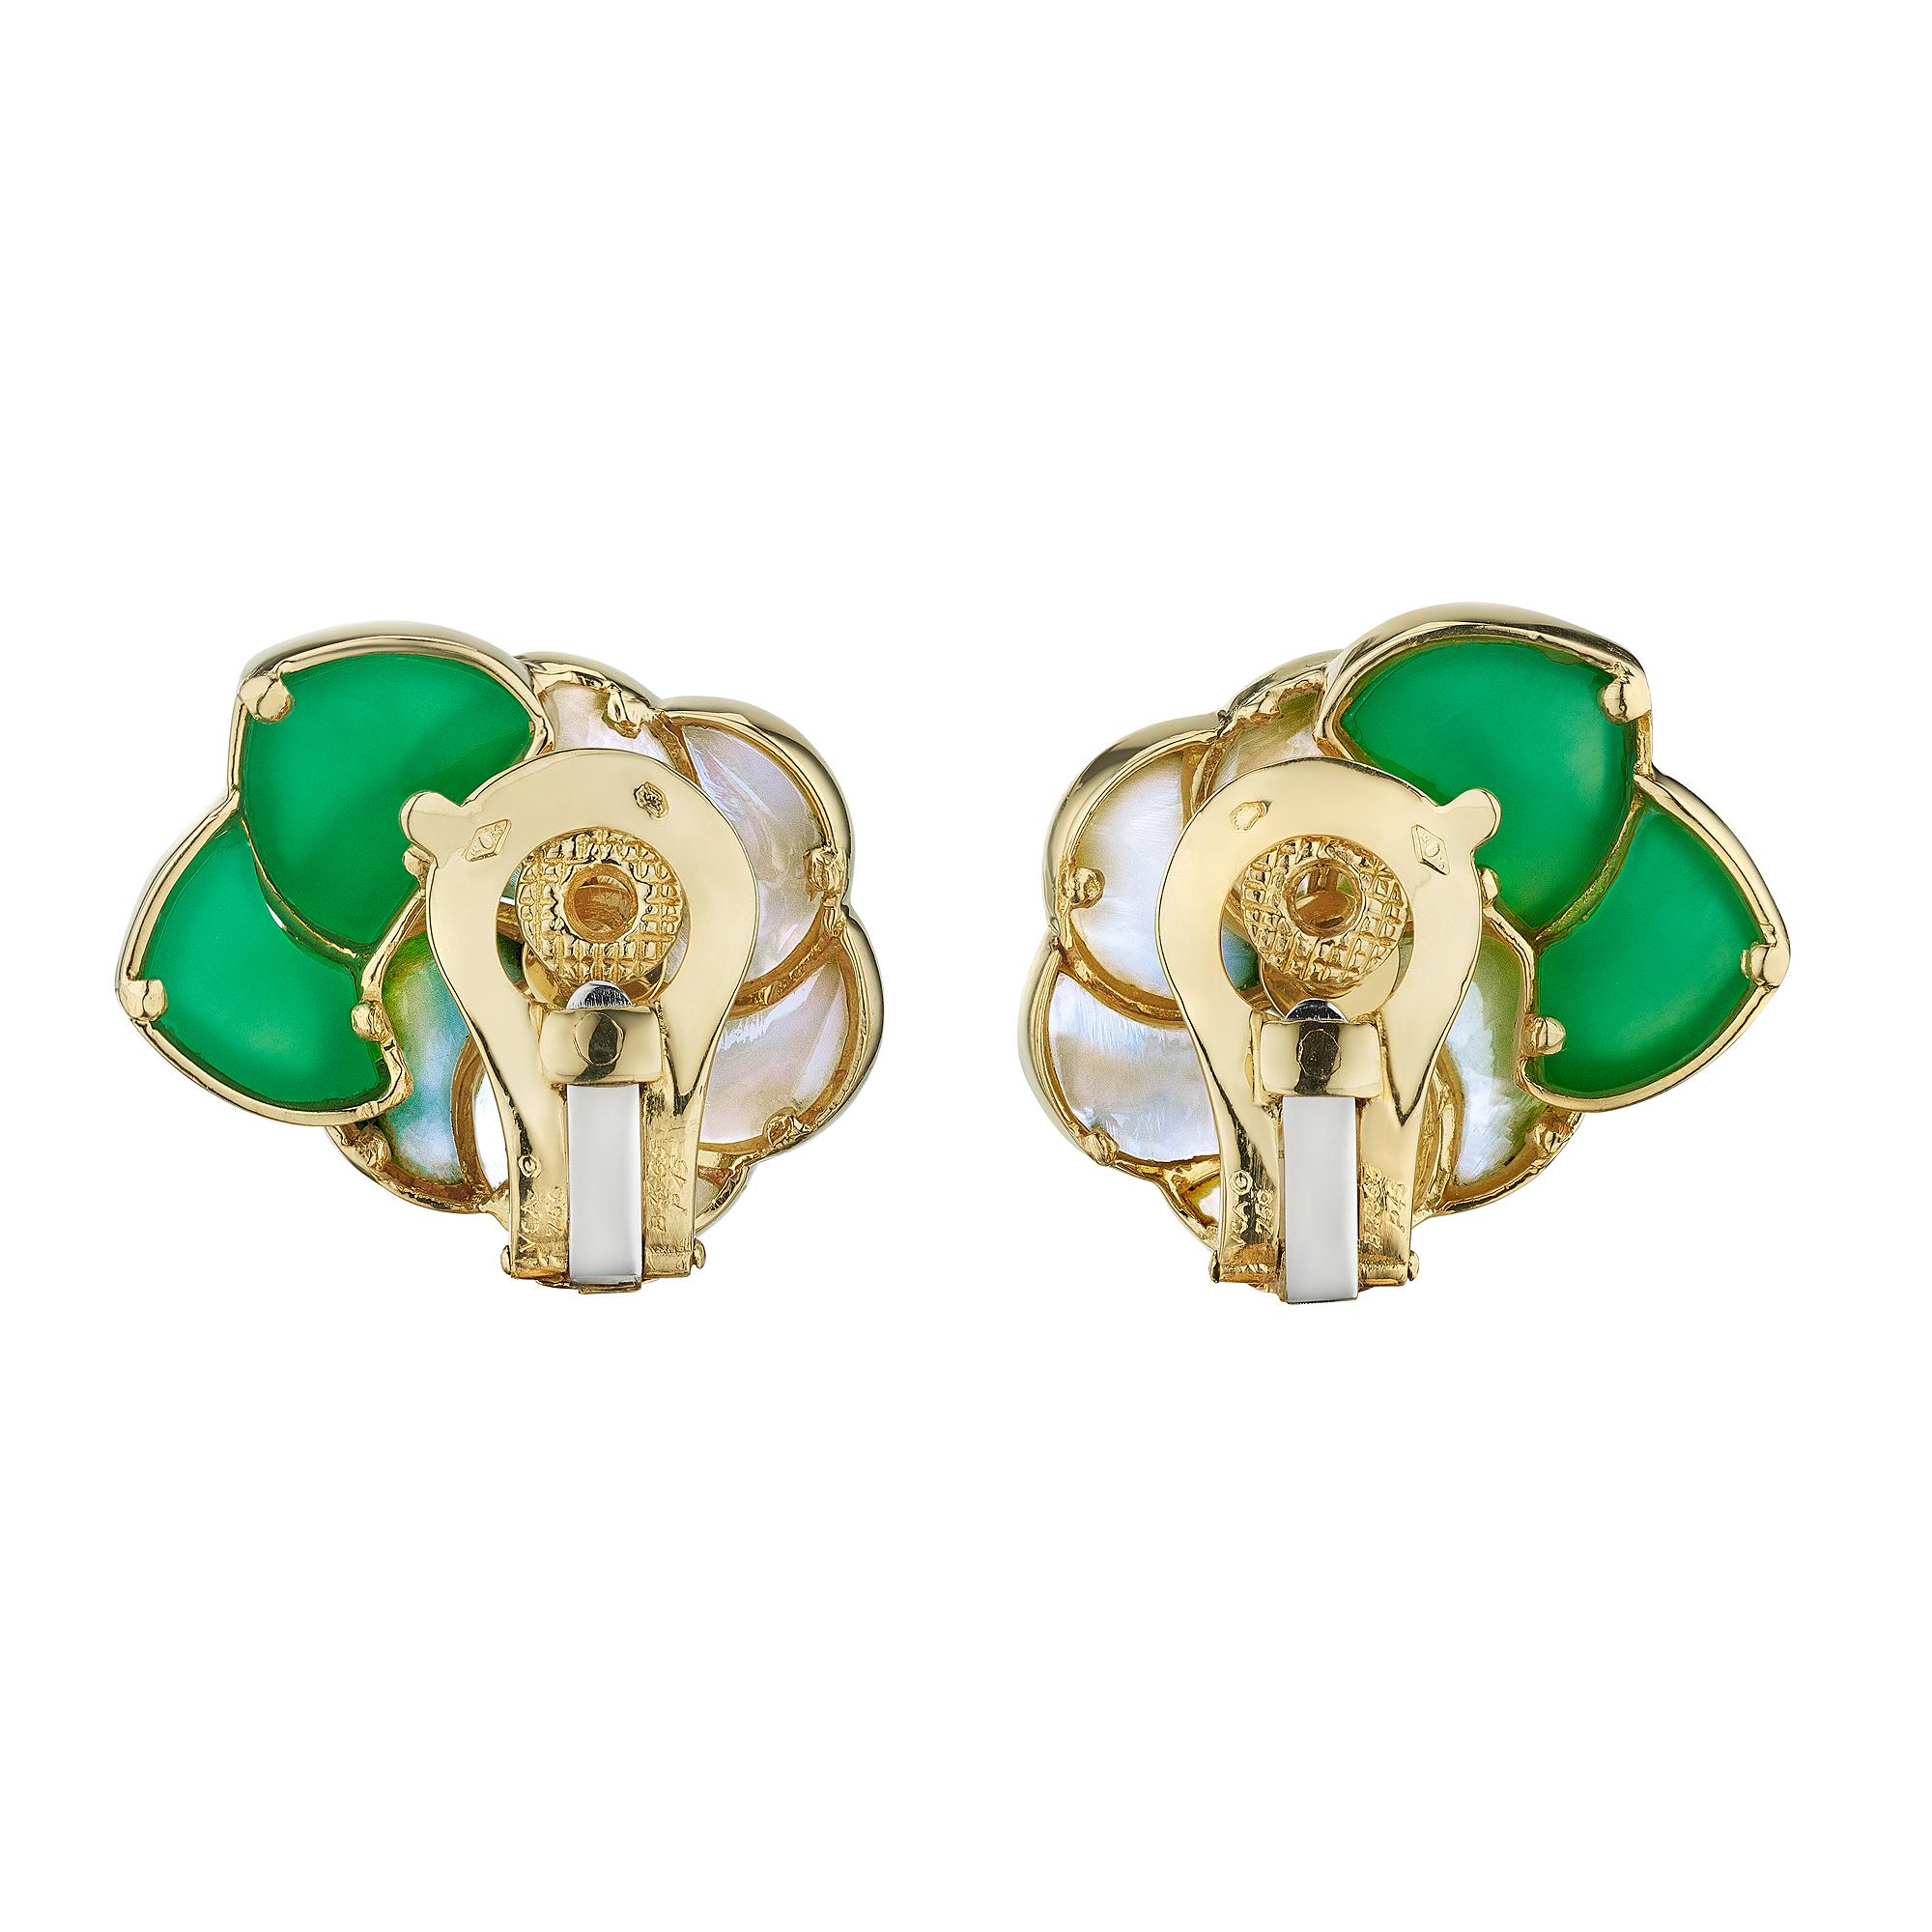 Unfolding like a prized gardenia flower, these vintage Van Cleef & Arpels Paris floral clip earrings will always keep you surrounded with the glorious scent of summer.  With luscious deep green chrysoprase leaves, two dimensional mother-of-pearl